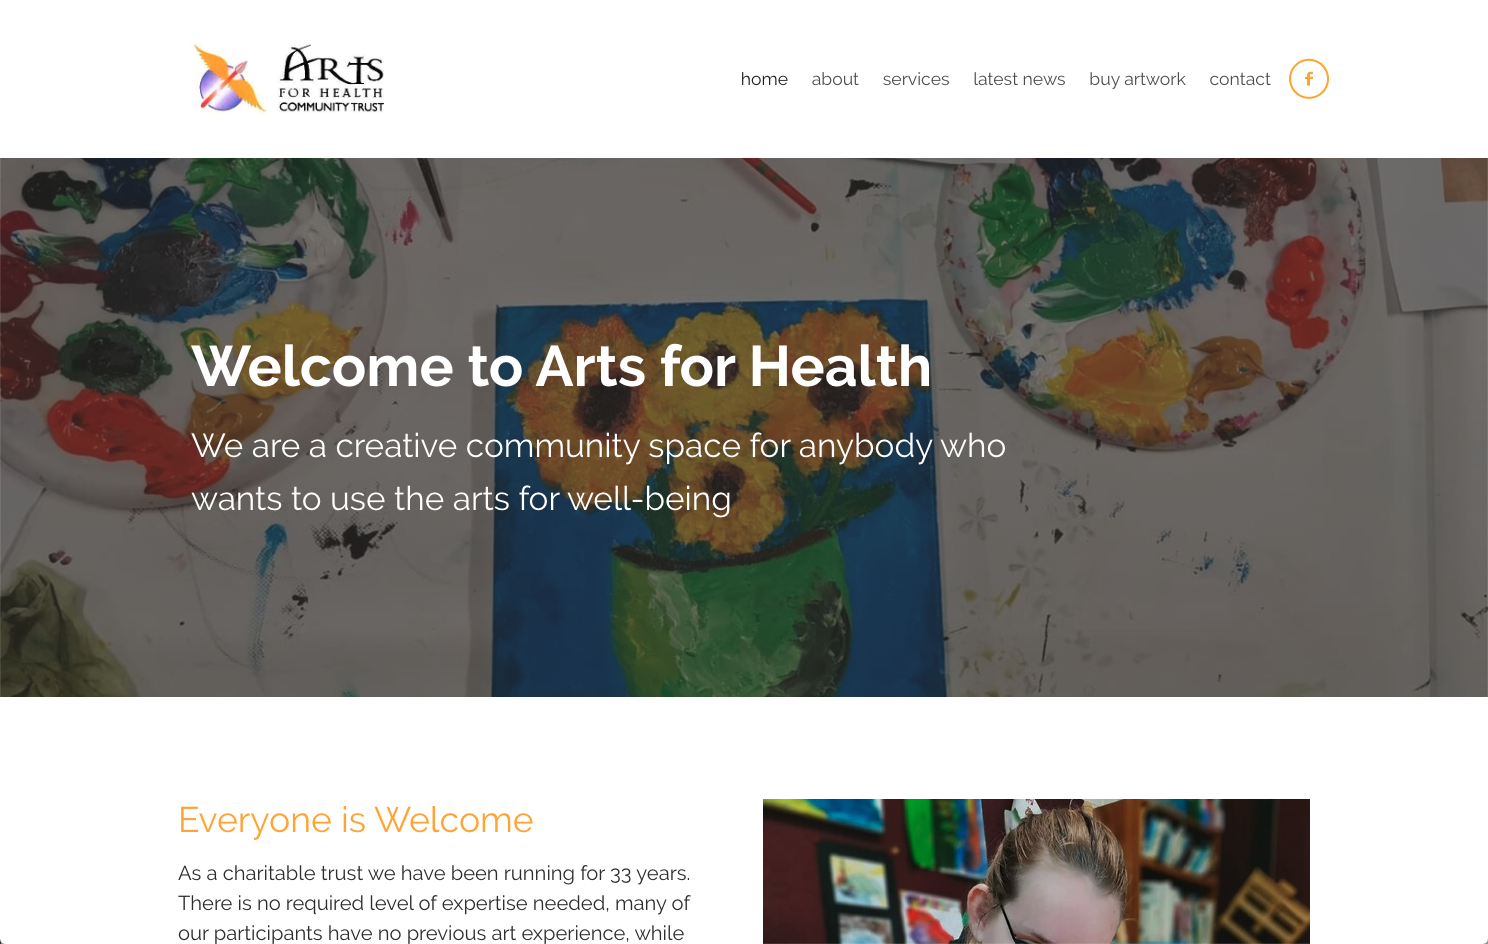 Arts for Health home page